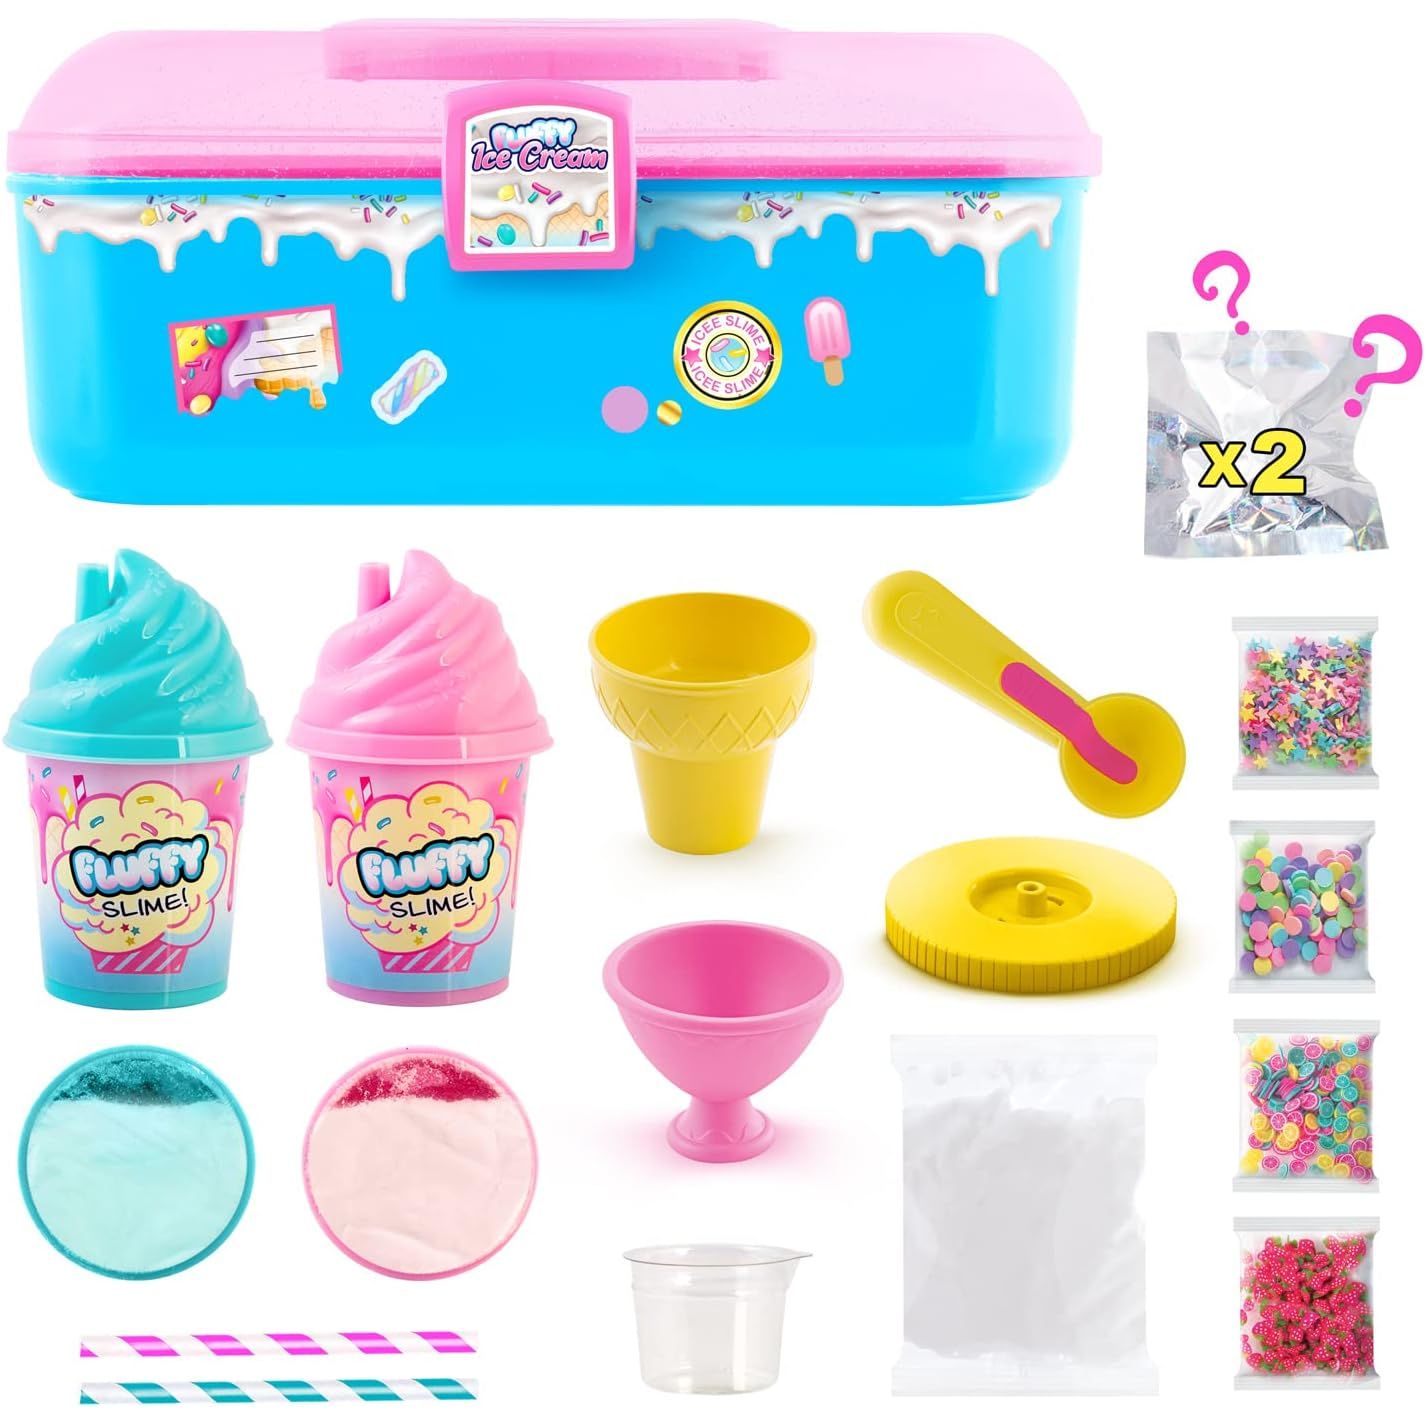 Canal Toys Fluffy Slime Shaker SSC206